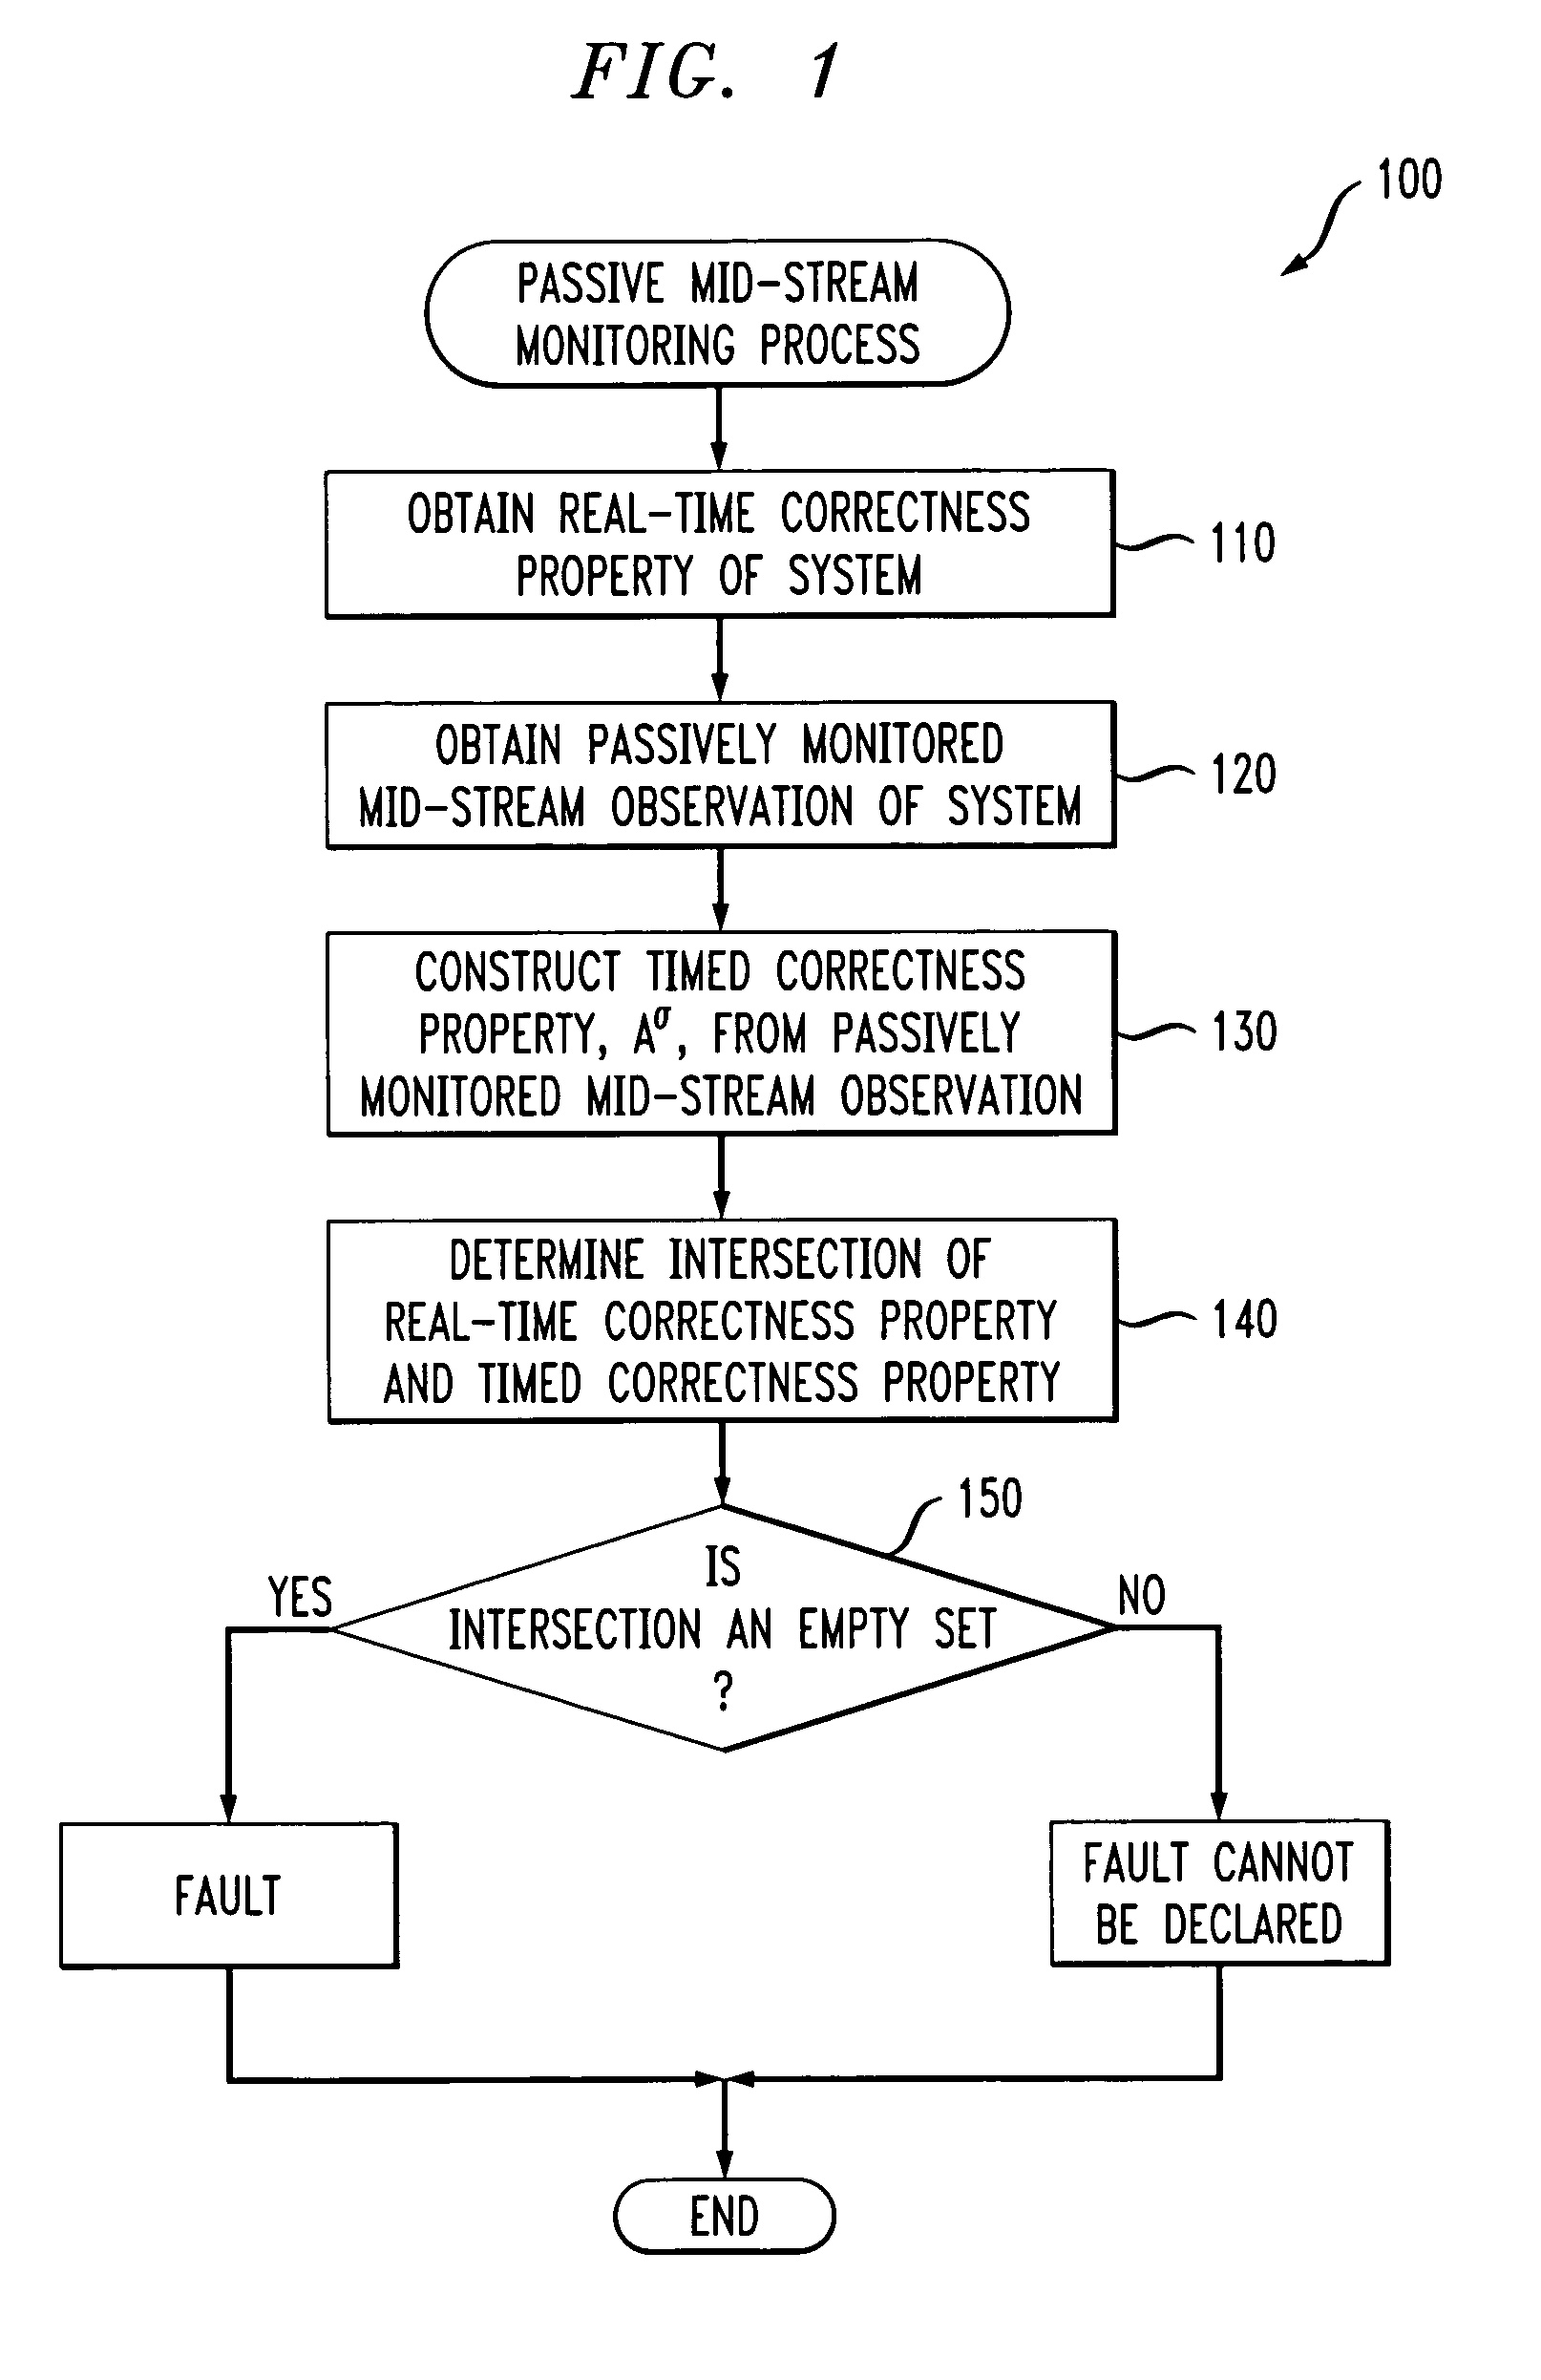 Methods and apparatus for passive mid-stream monitoring of real-time properties